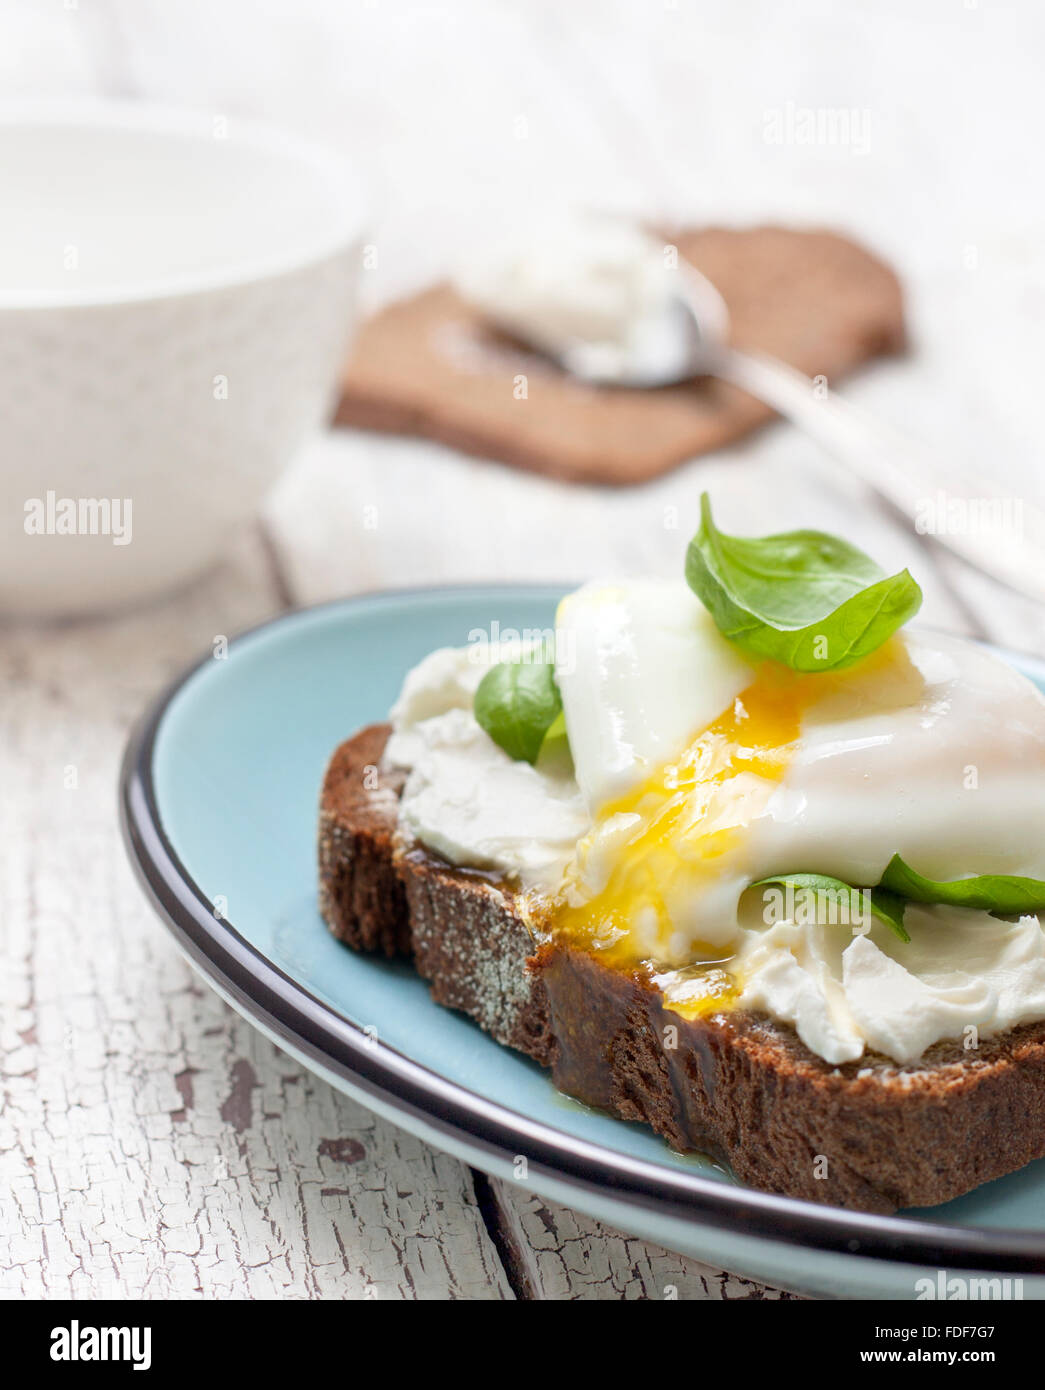 Toast With Poached Egg Cottage Cheese And Basil Leaves On A